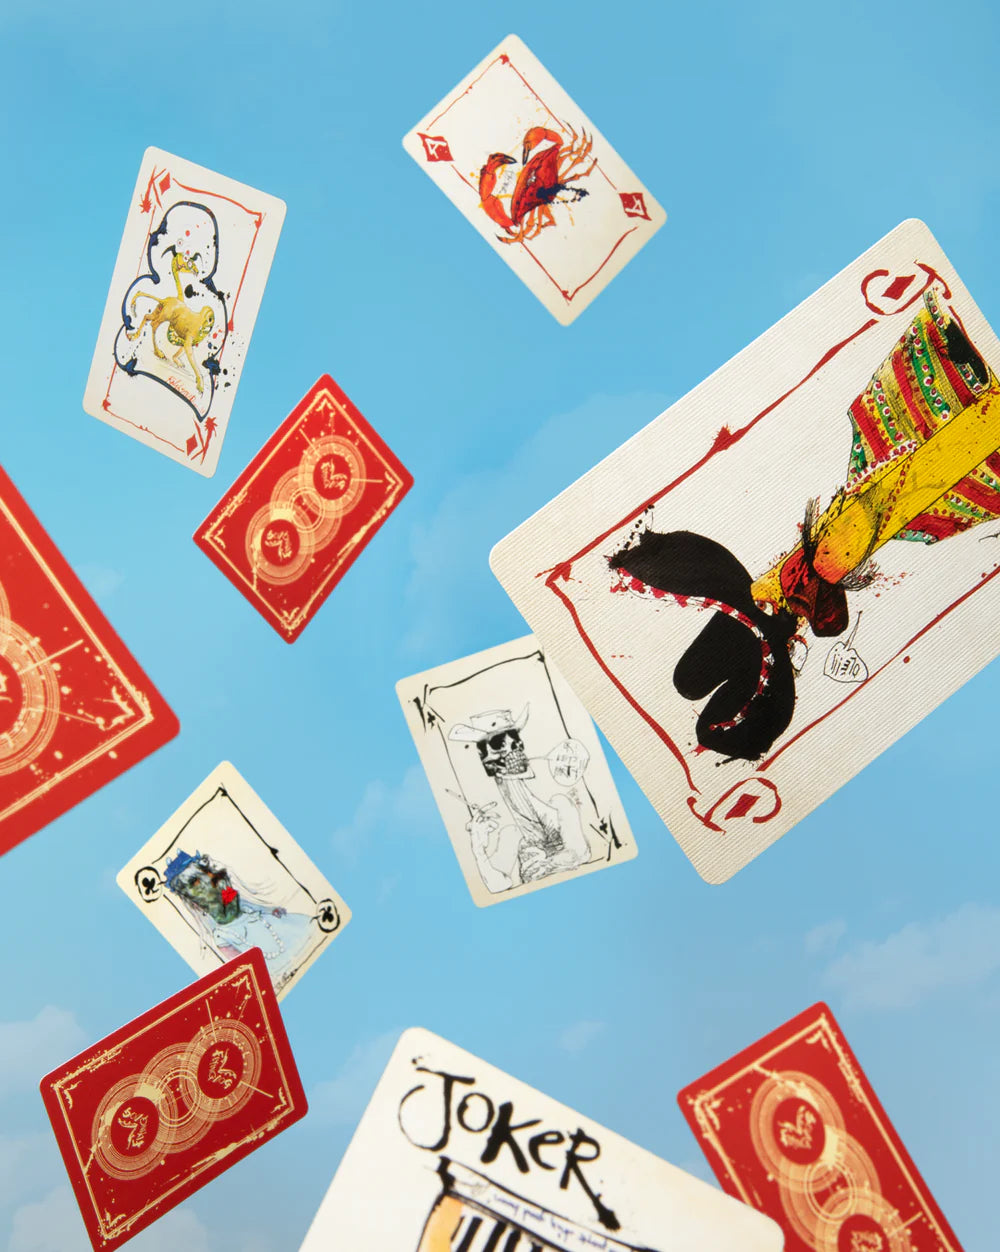 flying dog v1 art of playProduced in collaboration with Flying Dog Brewery and visionary artist Ralph Steadman we are proud to present The Ralph Steadman Art Collection beautifully printed on playing cards.